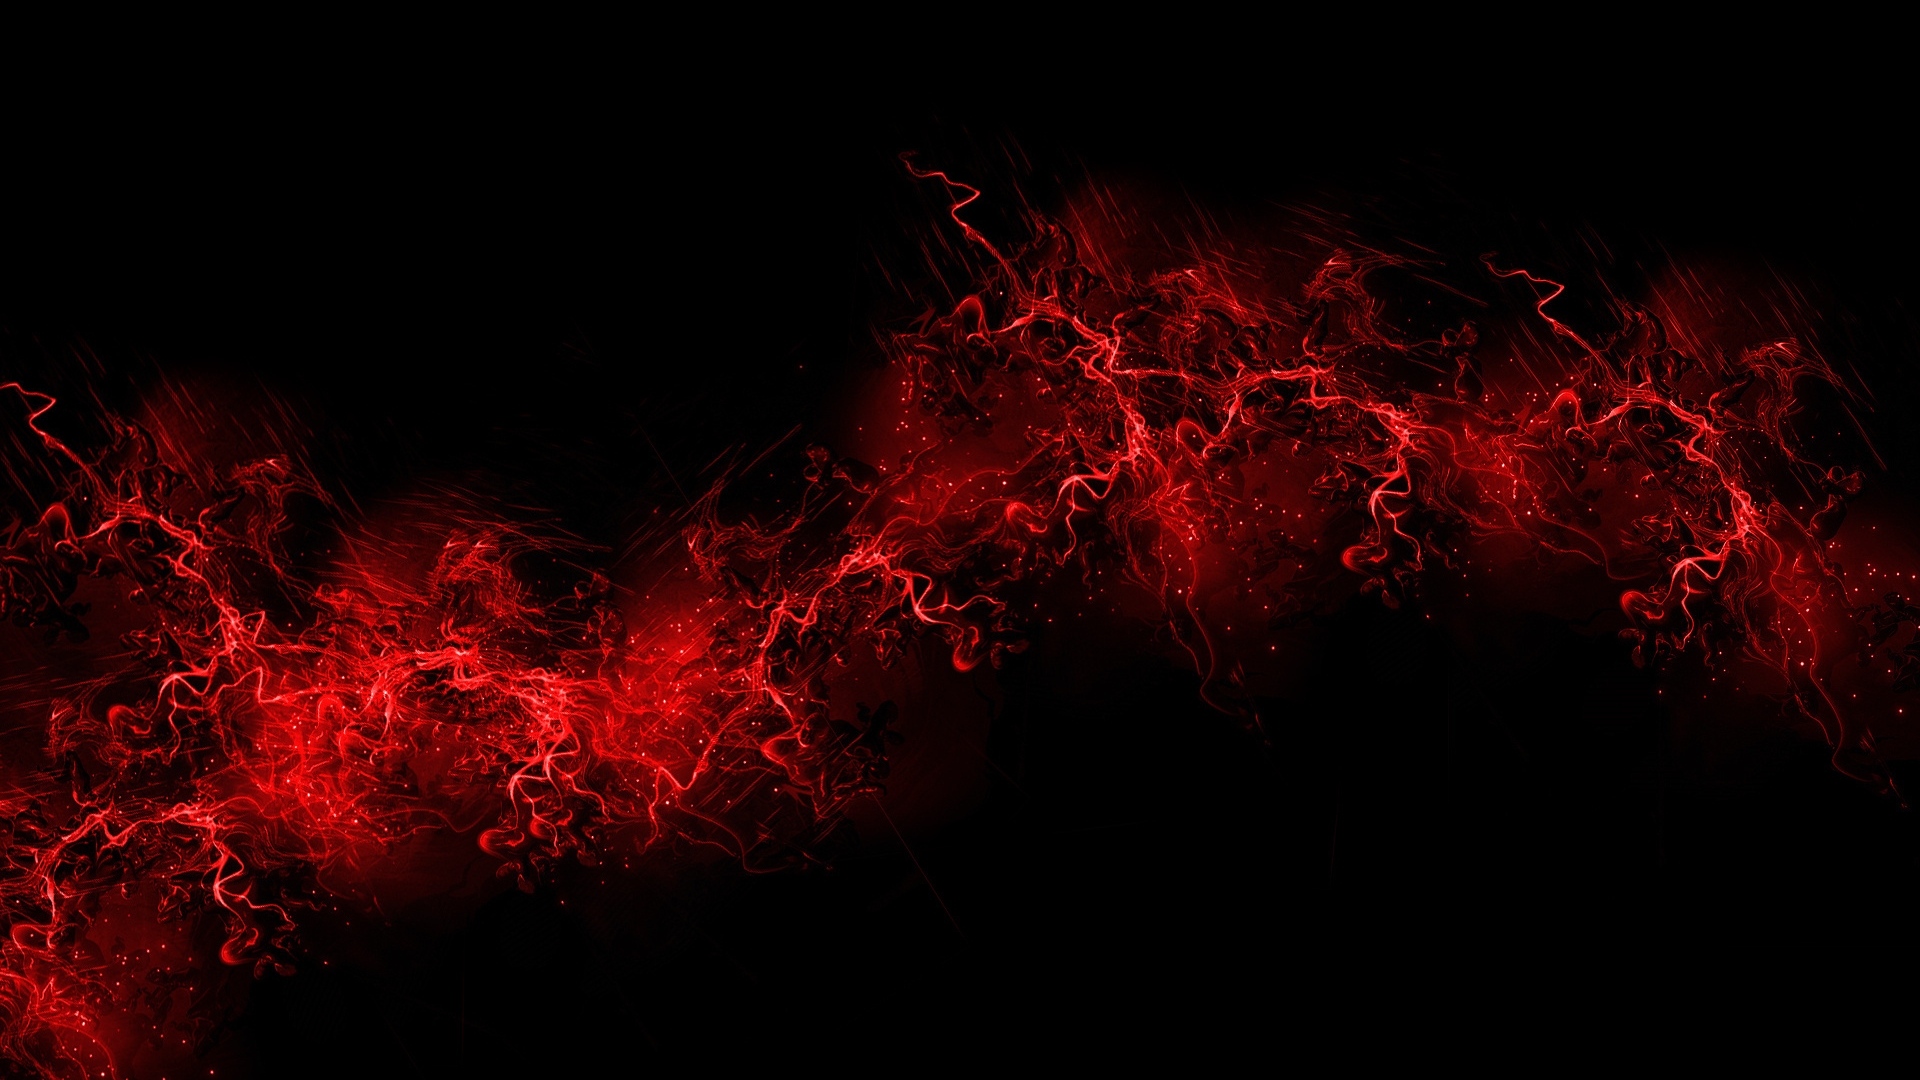 Black And Red Abstract Wallpaper Sf